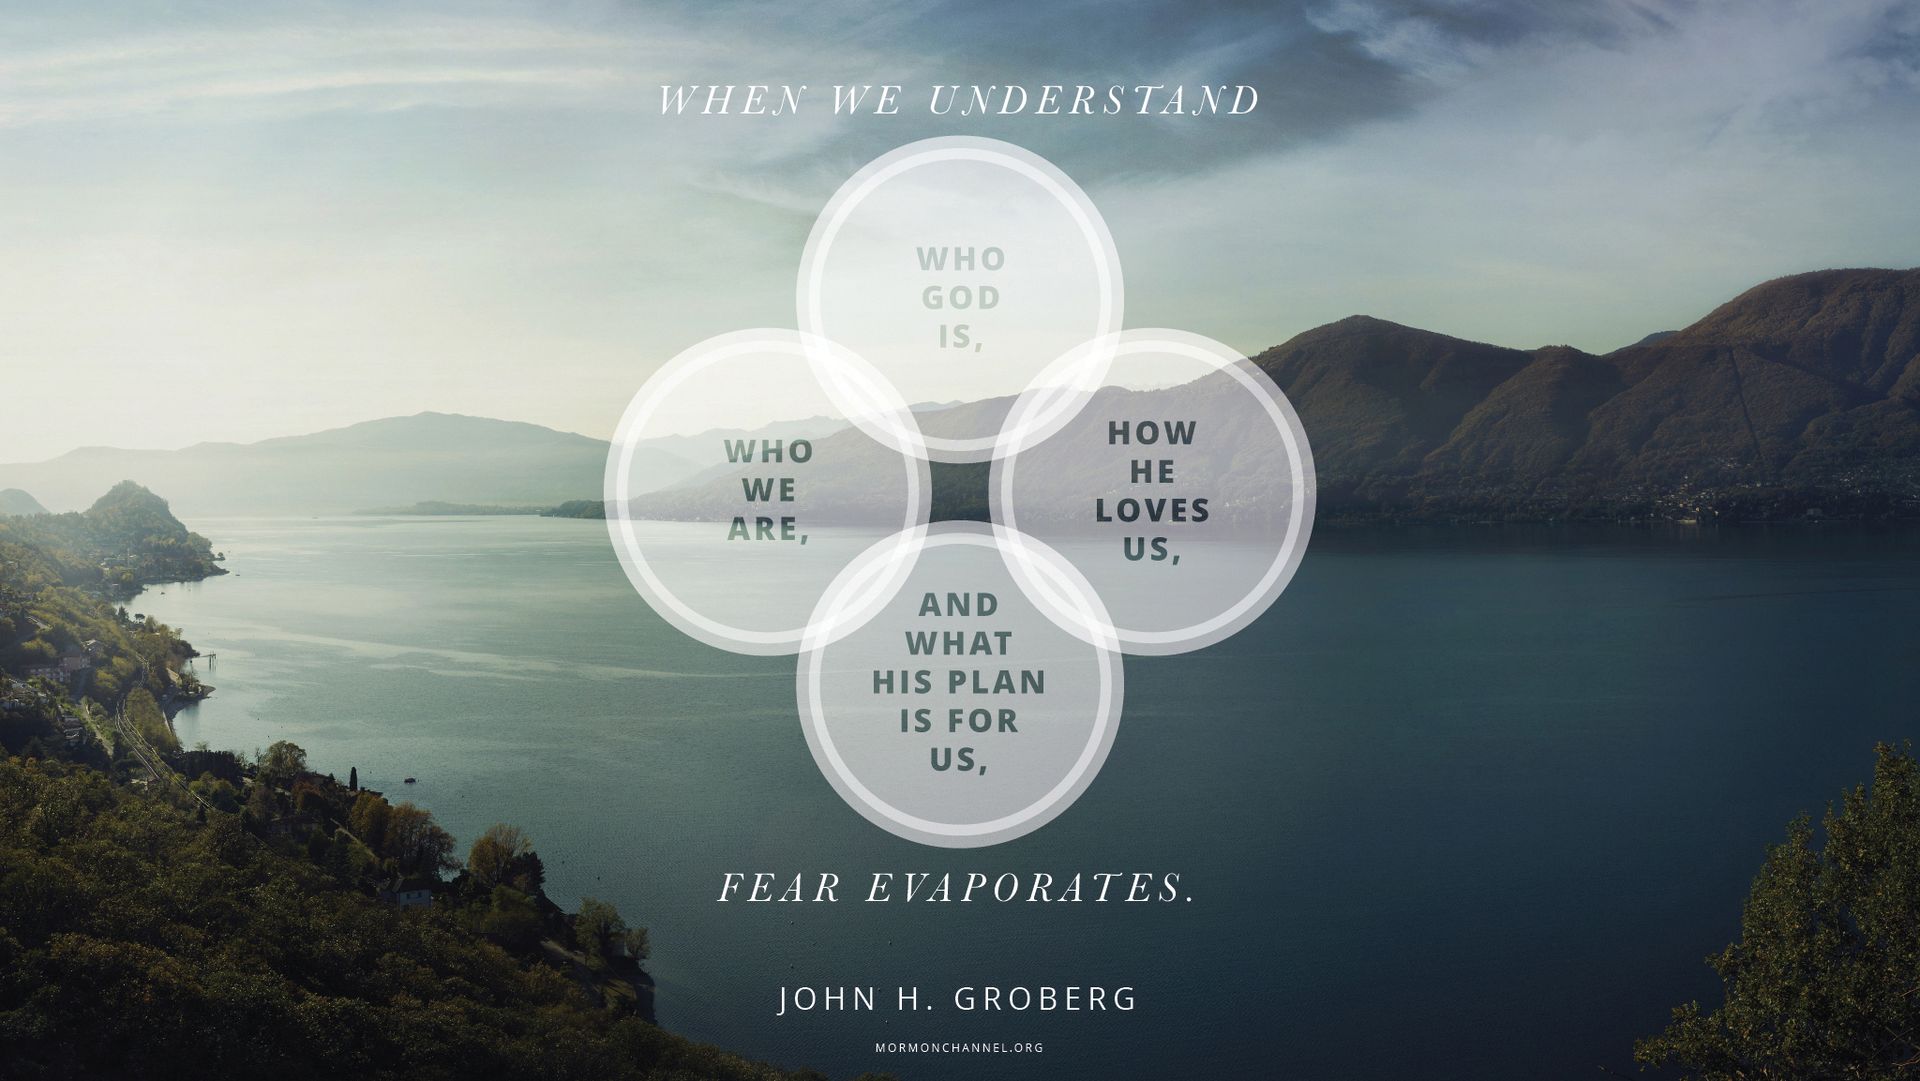 “When we understand who God is, who we are, how He loves us, and what His plan is for us, fear evaporates.”—Elder John H. Groberg, “The Power of God’s Love” © undefined ipCode 1.